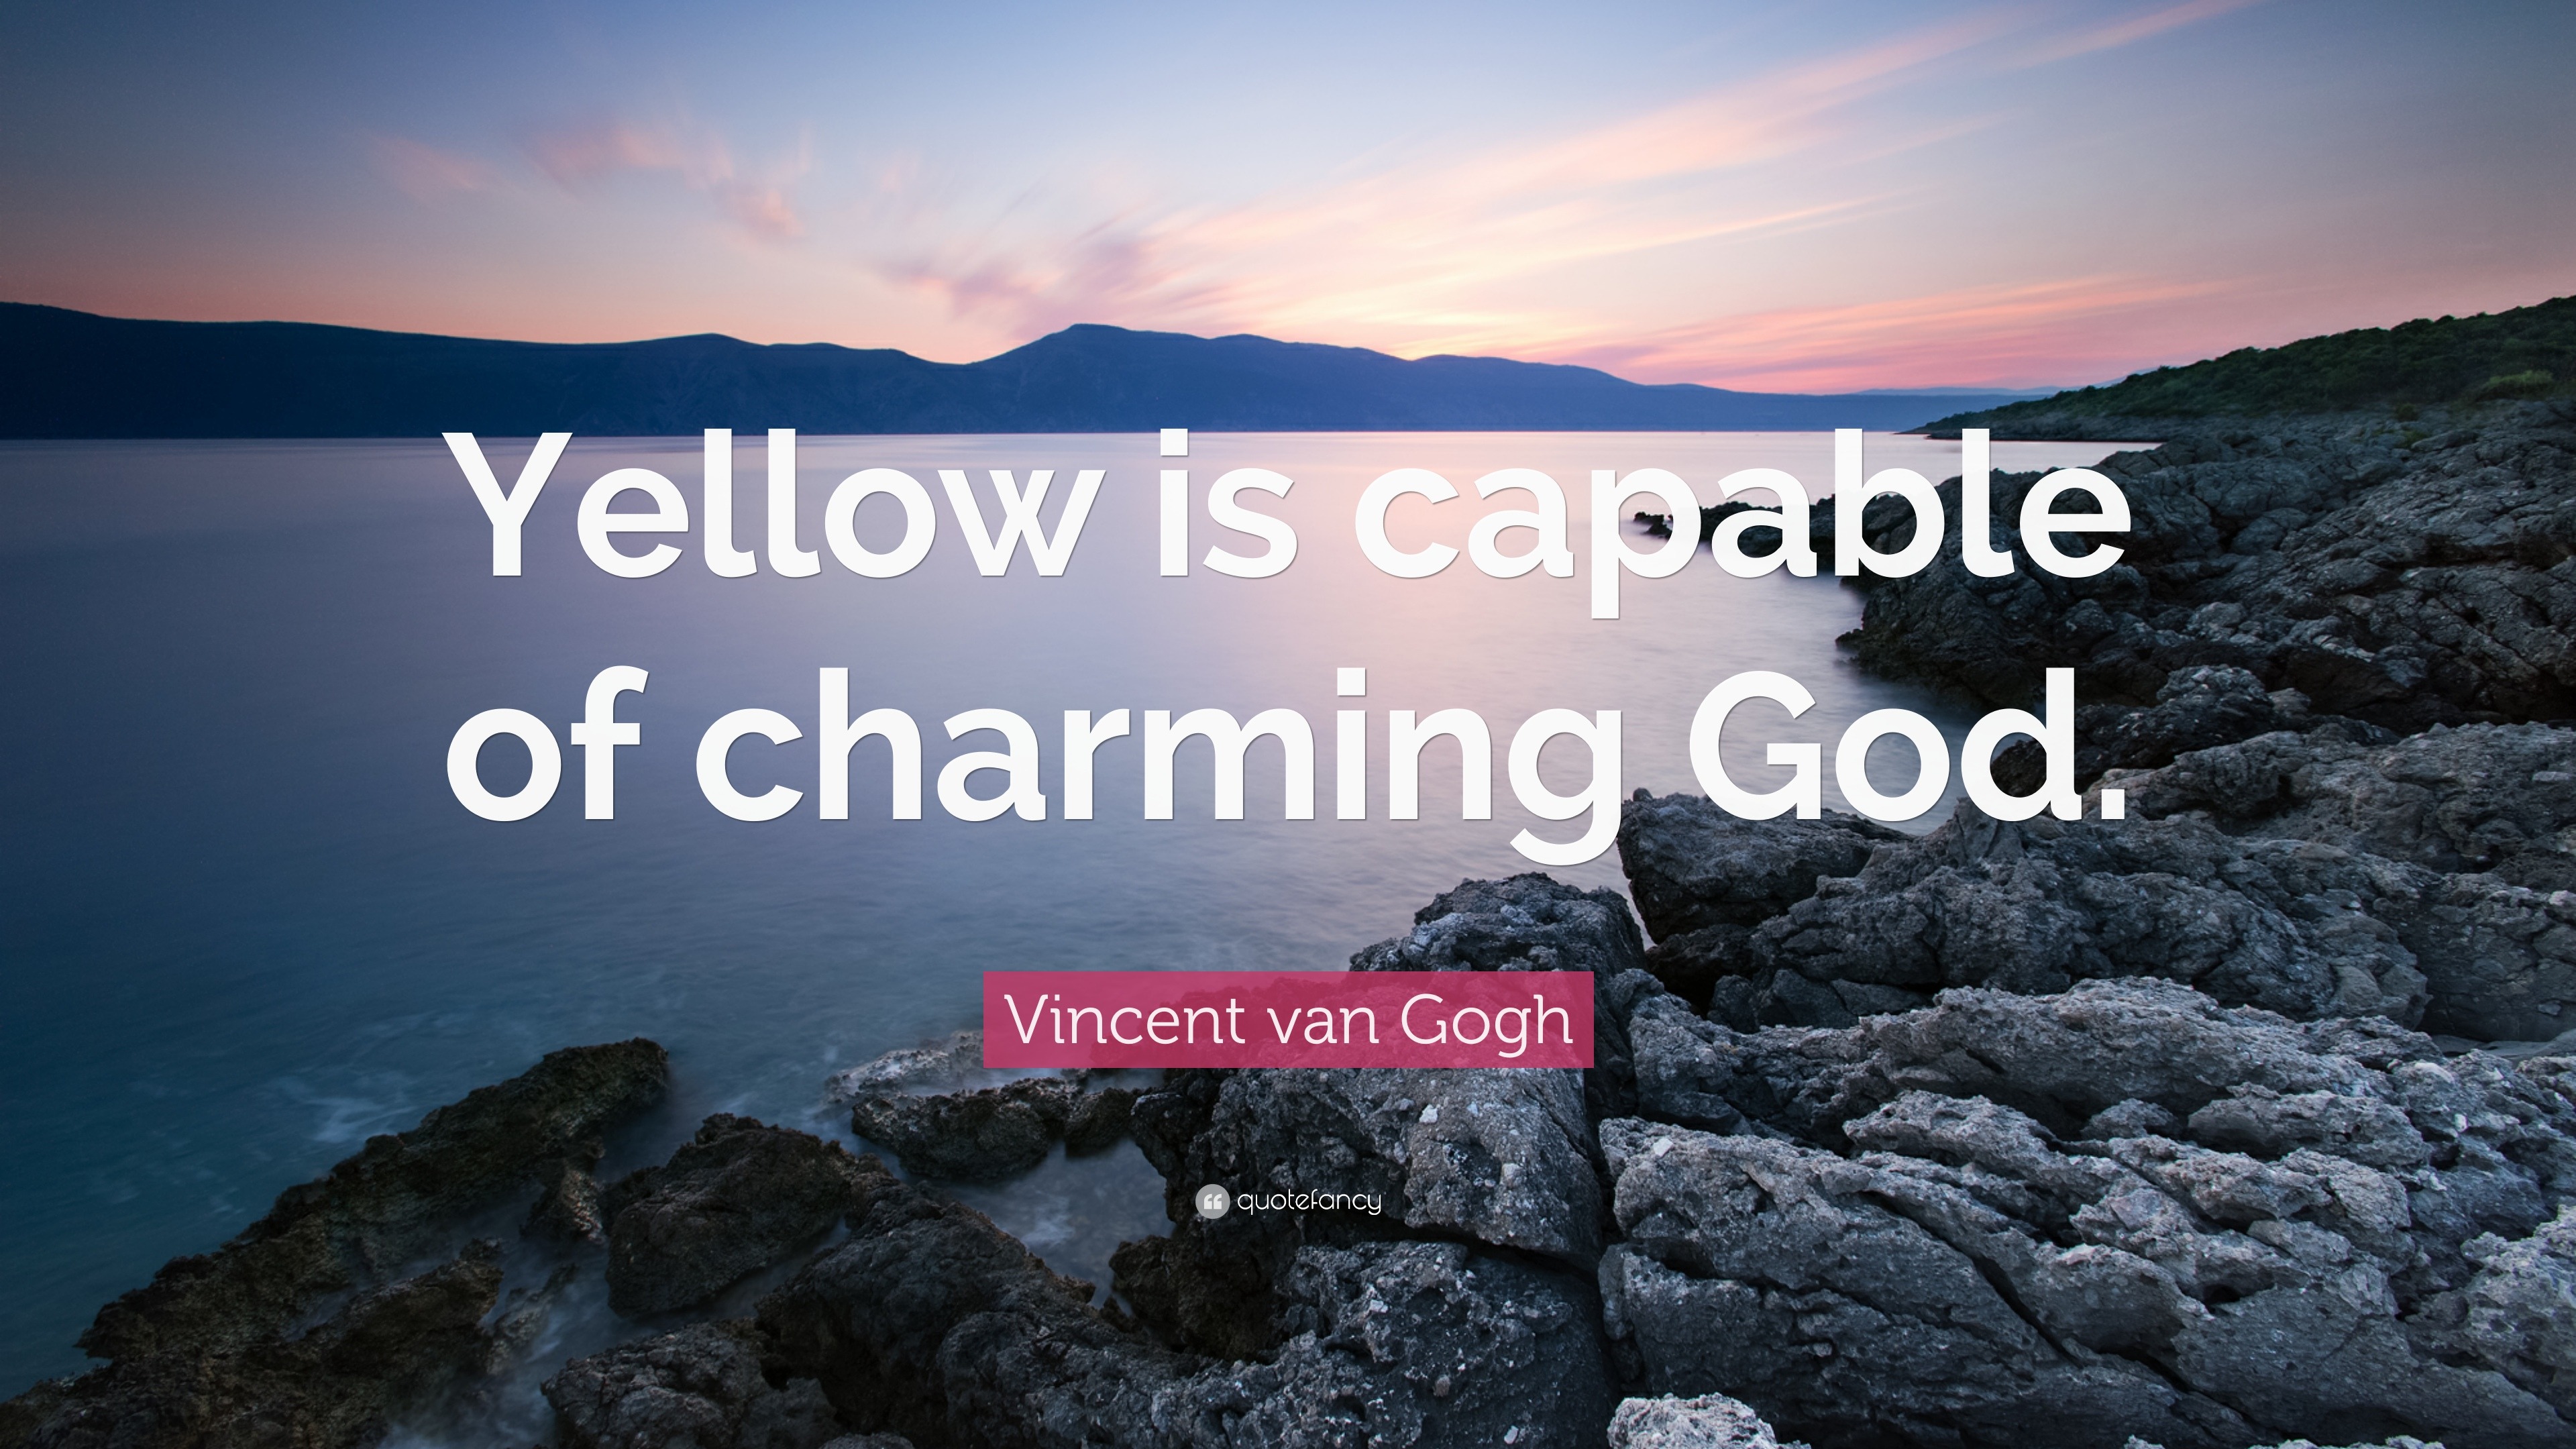 Vincent van Gogh Quote: "Yellow is capable of charming God."